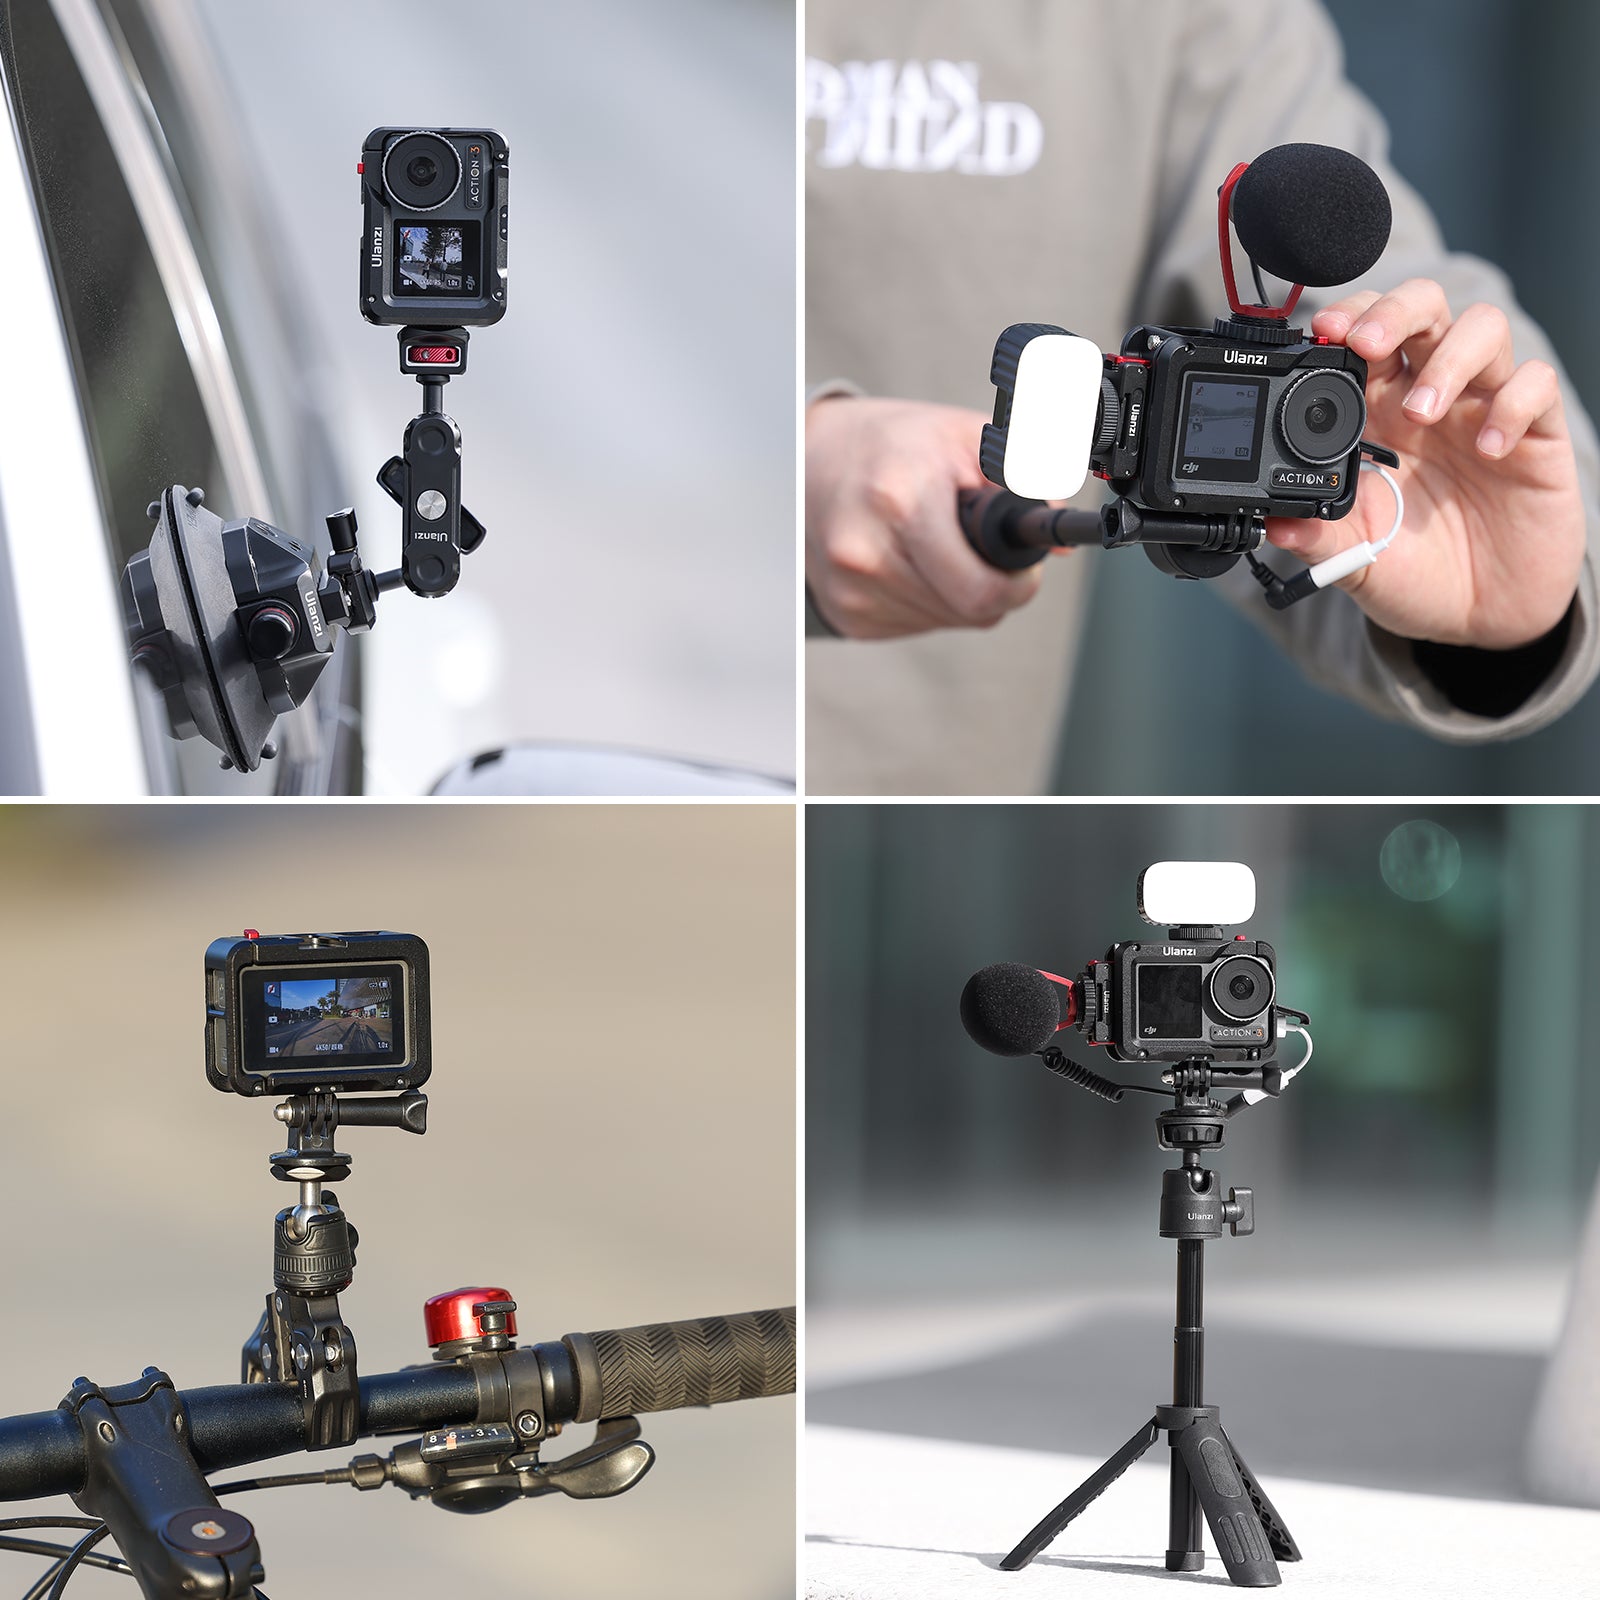 DJI Osmo Action 4: What's Upgraded from the Action 3? 